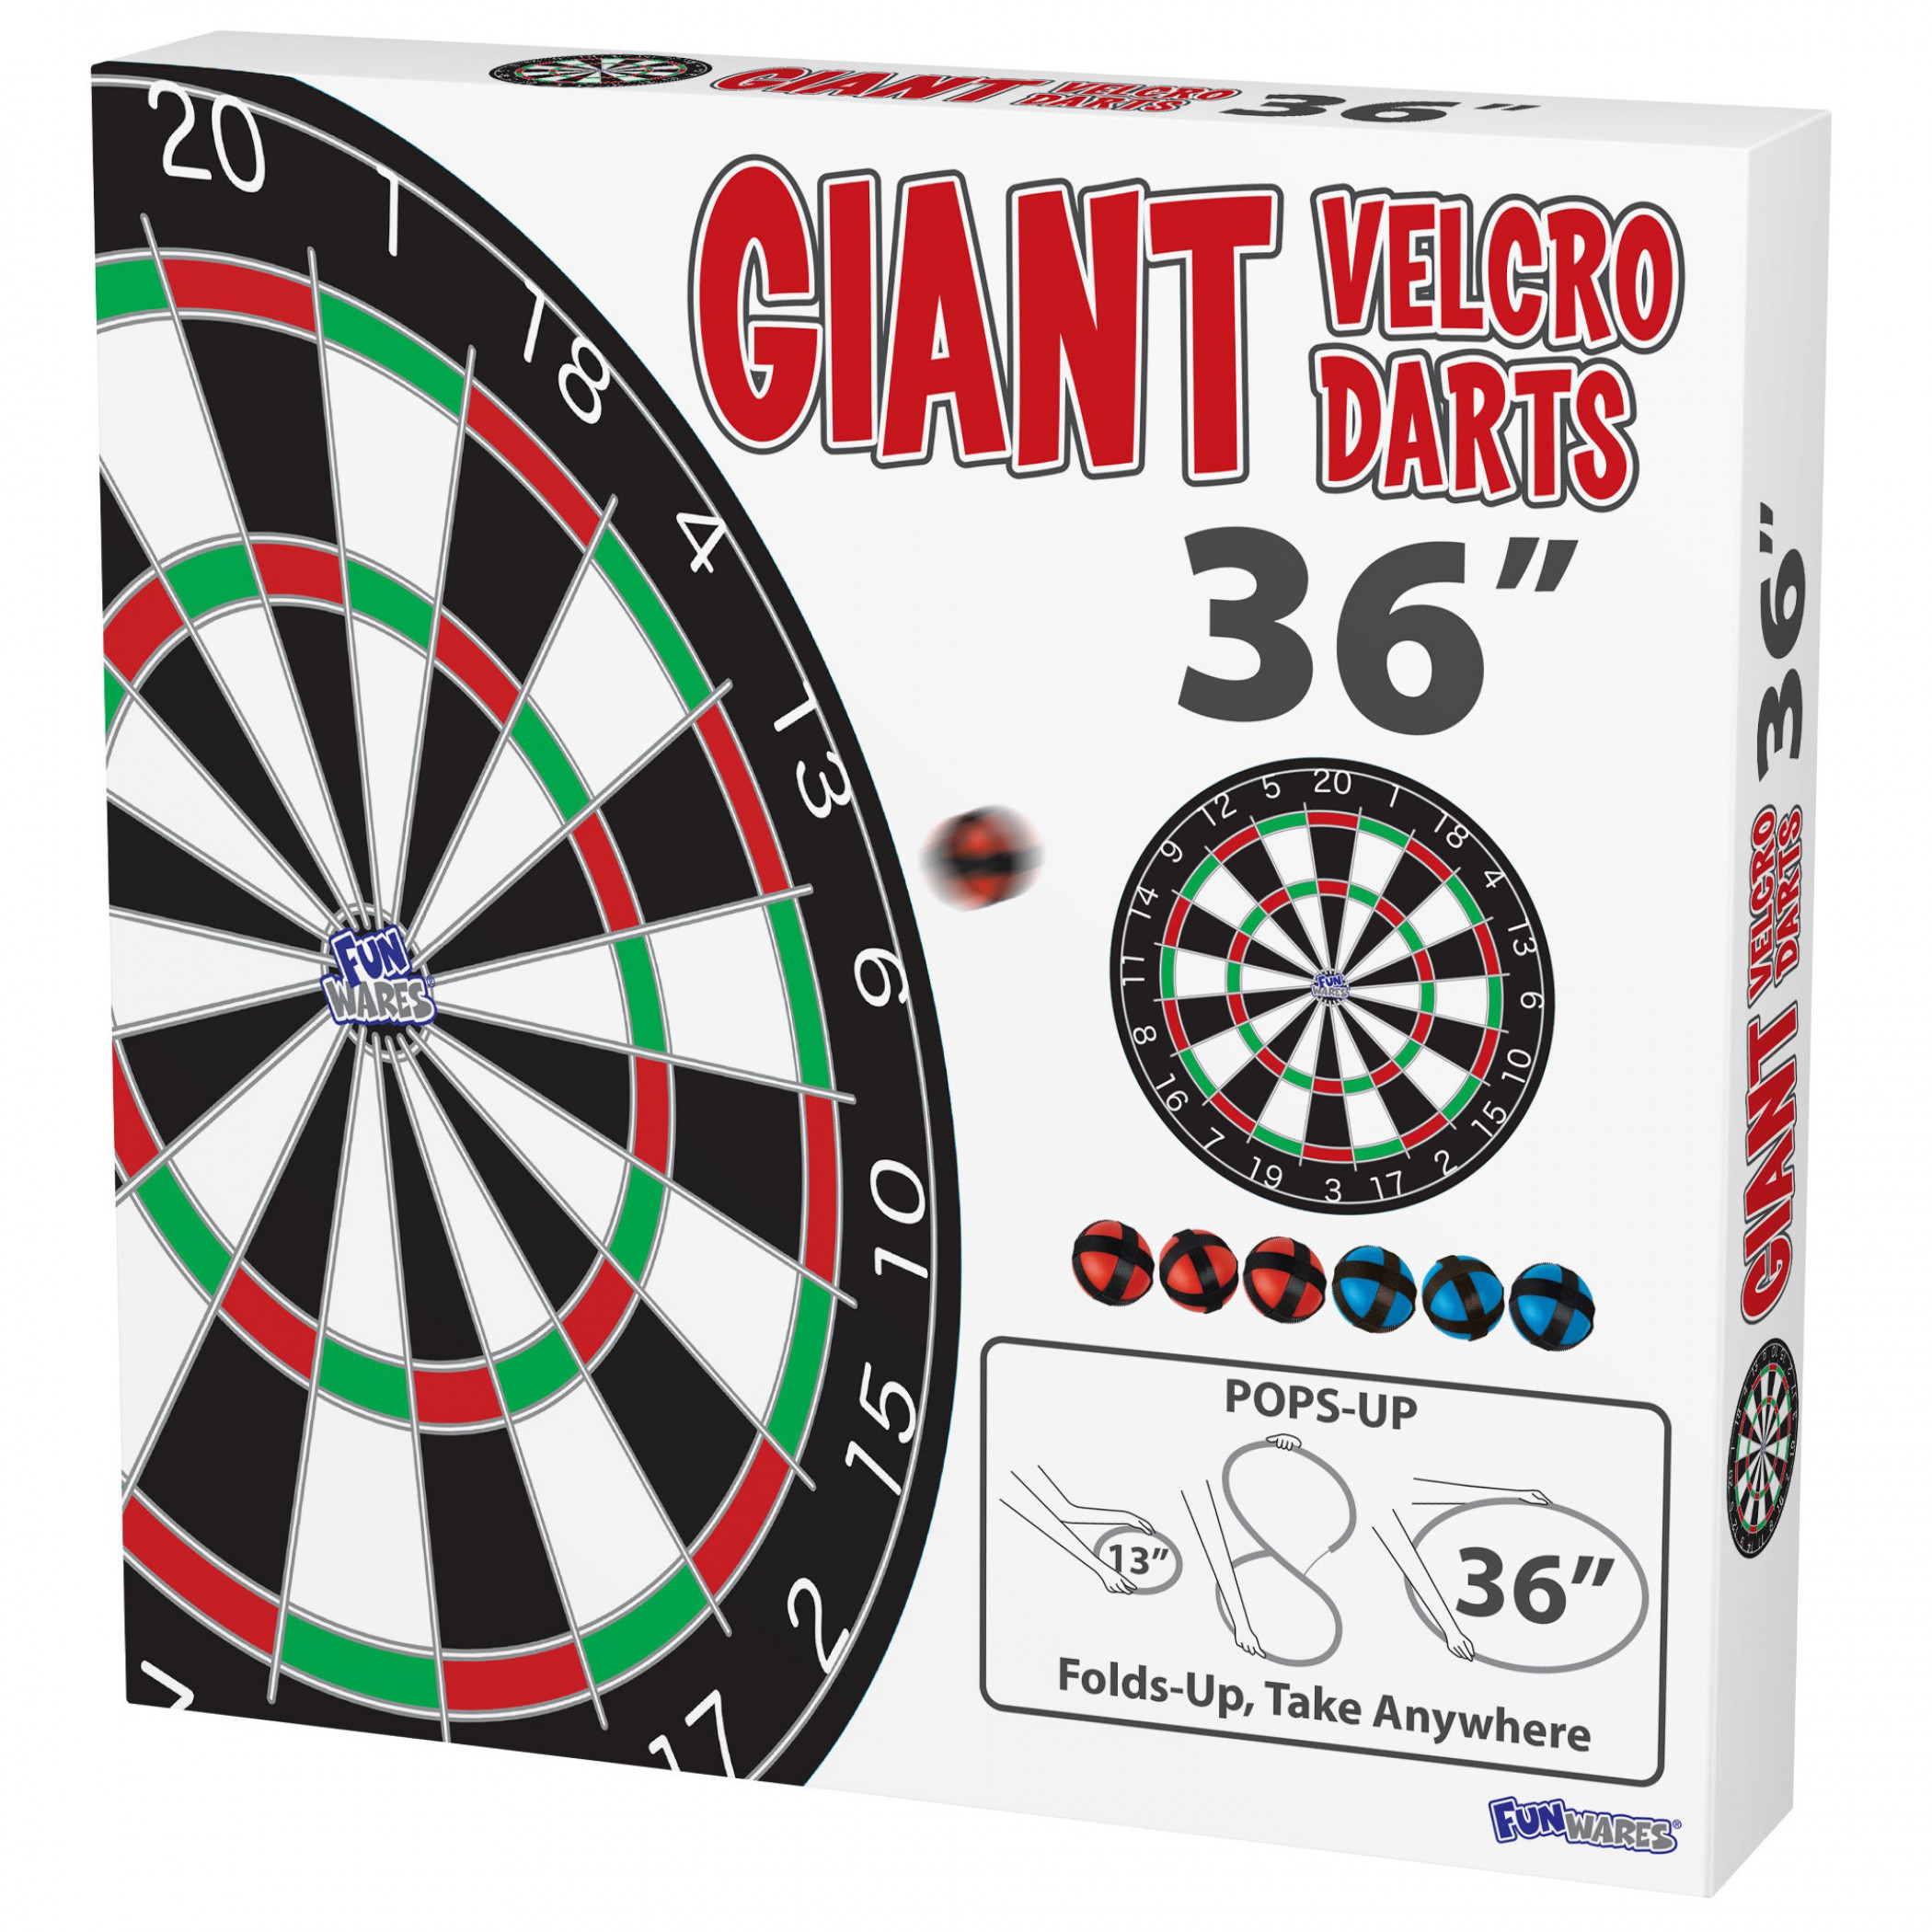 Giant Safety Darts with 36" Fabric Dartboard